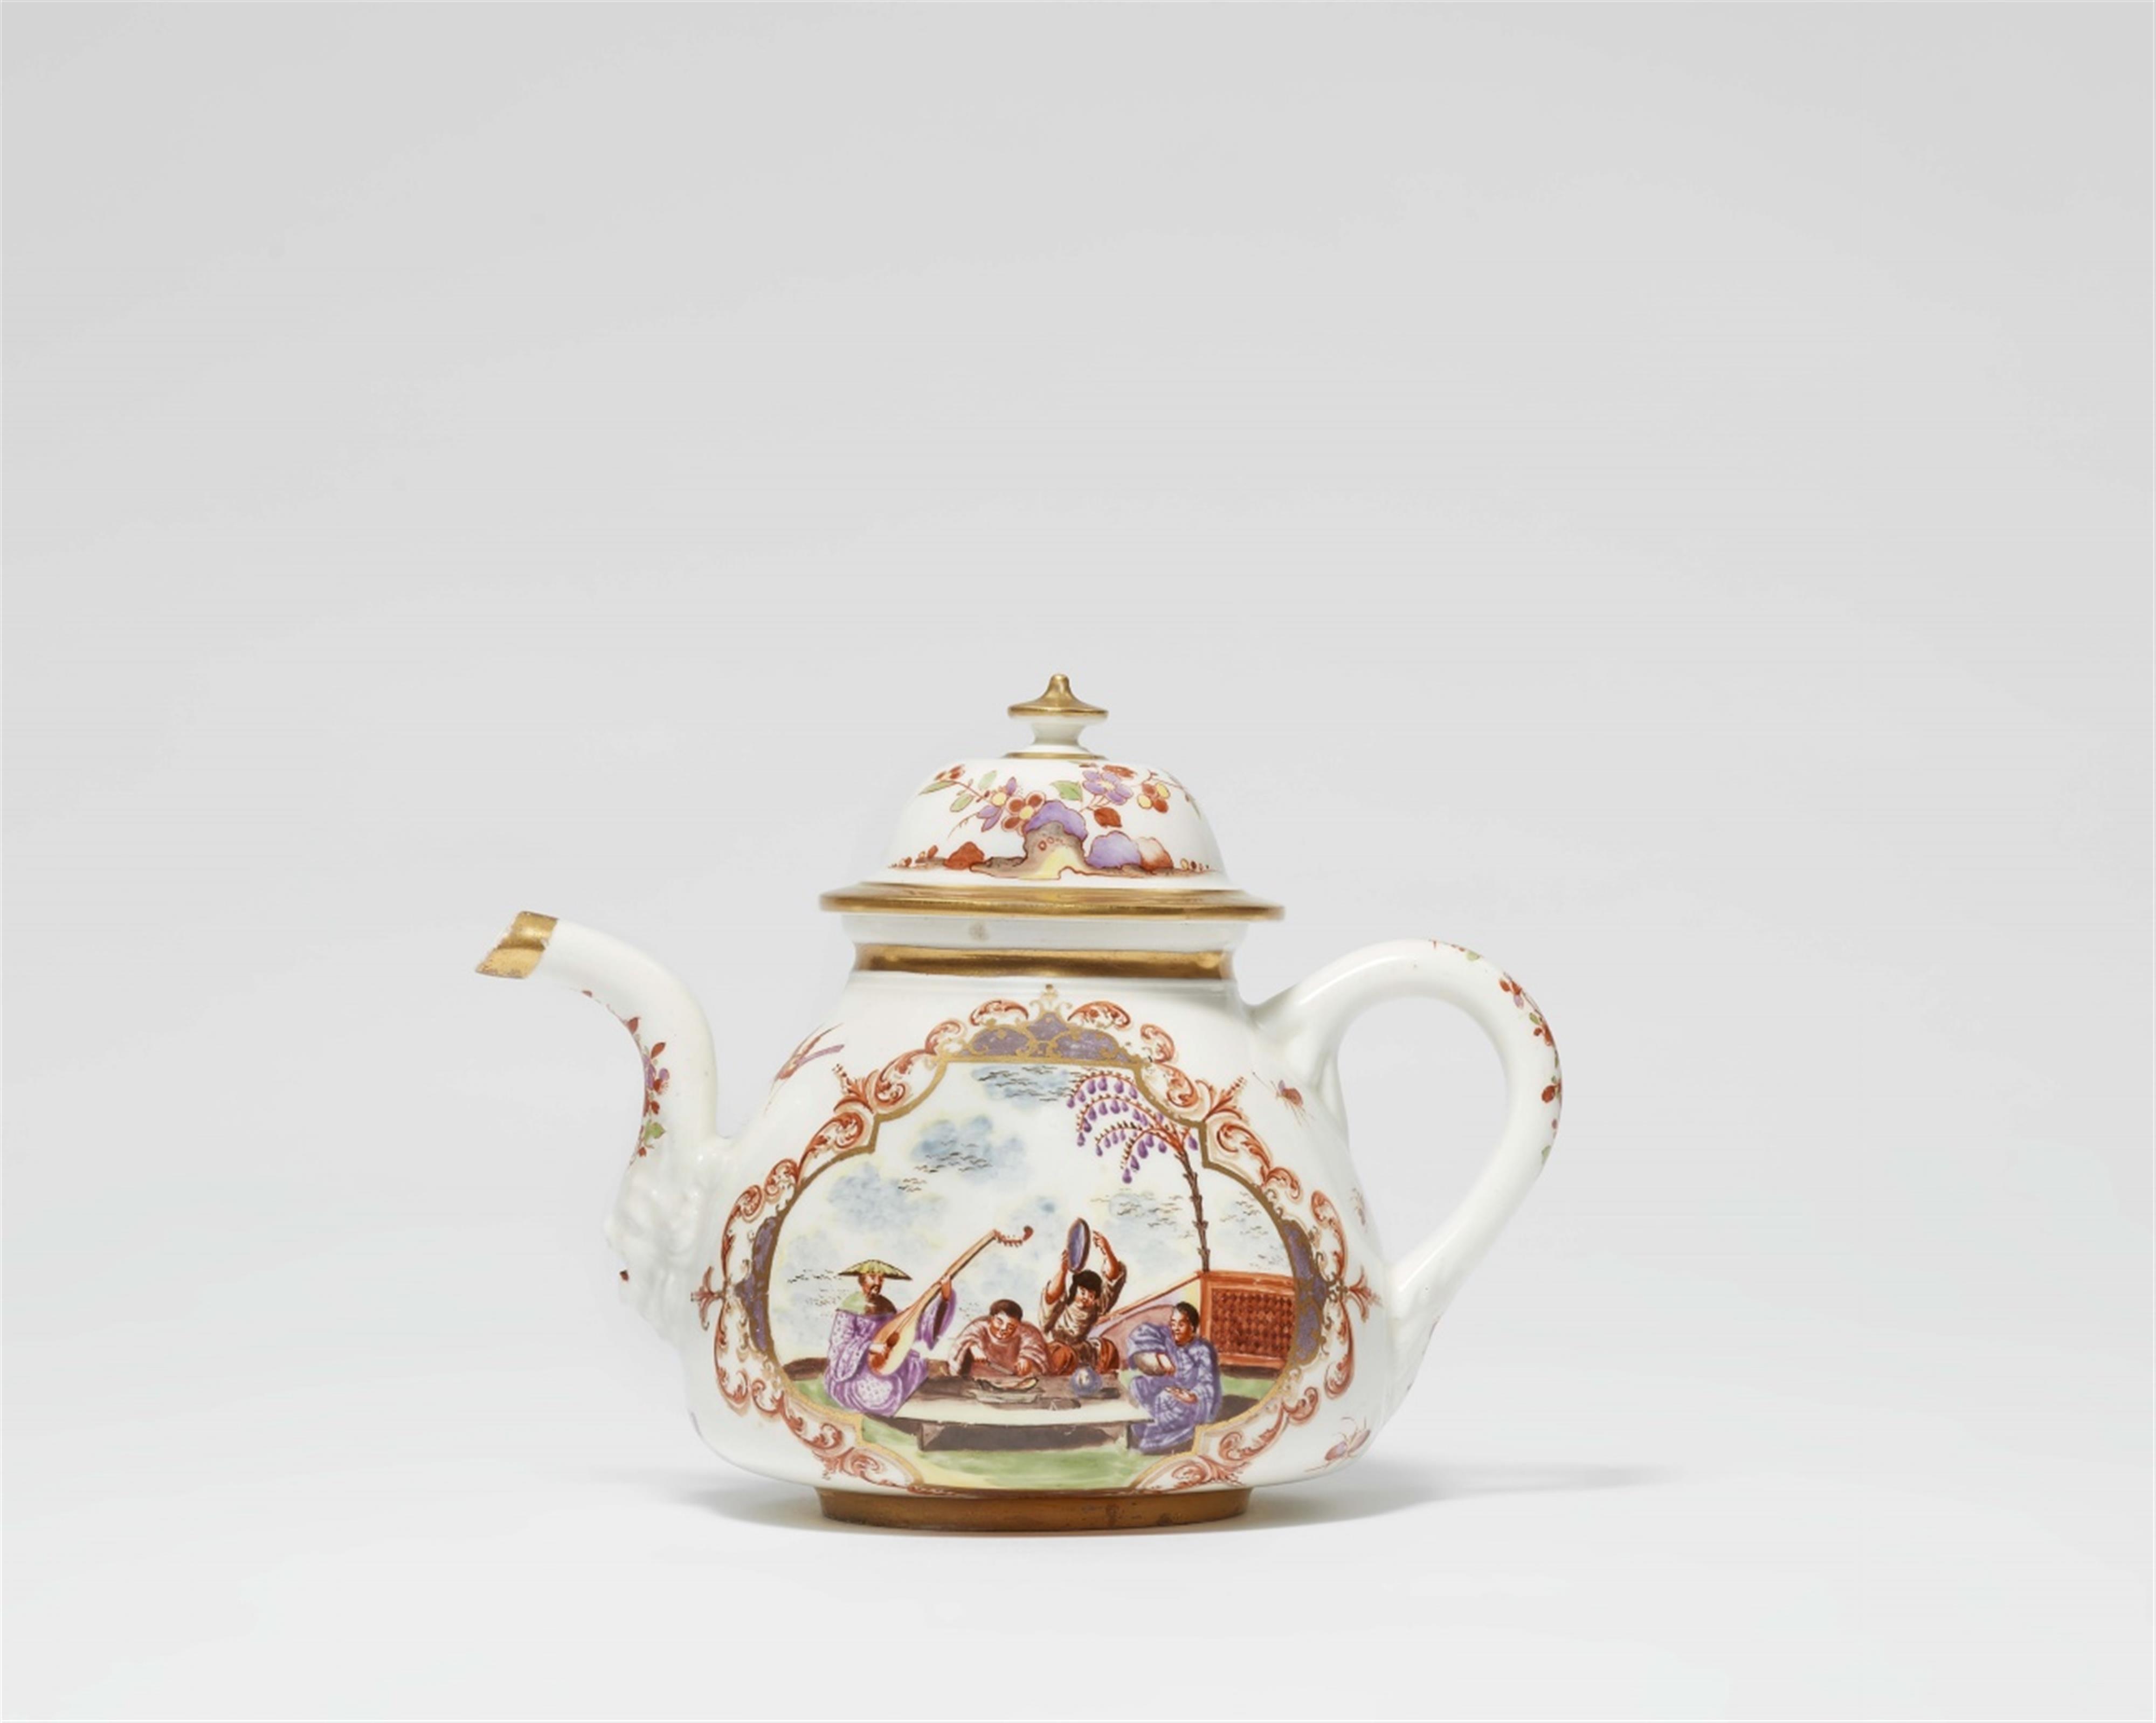 A Meissen porcelain teapot with K.P.M mark and Hoeroldt chinoiseries - image-1